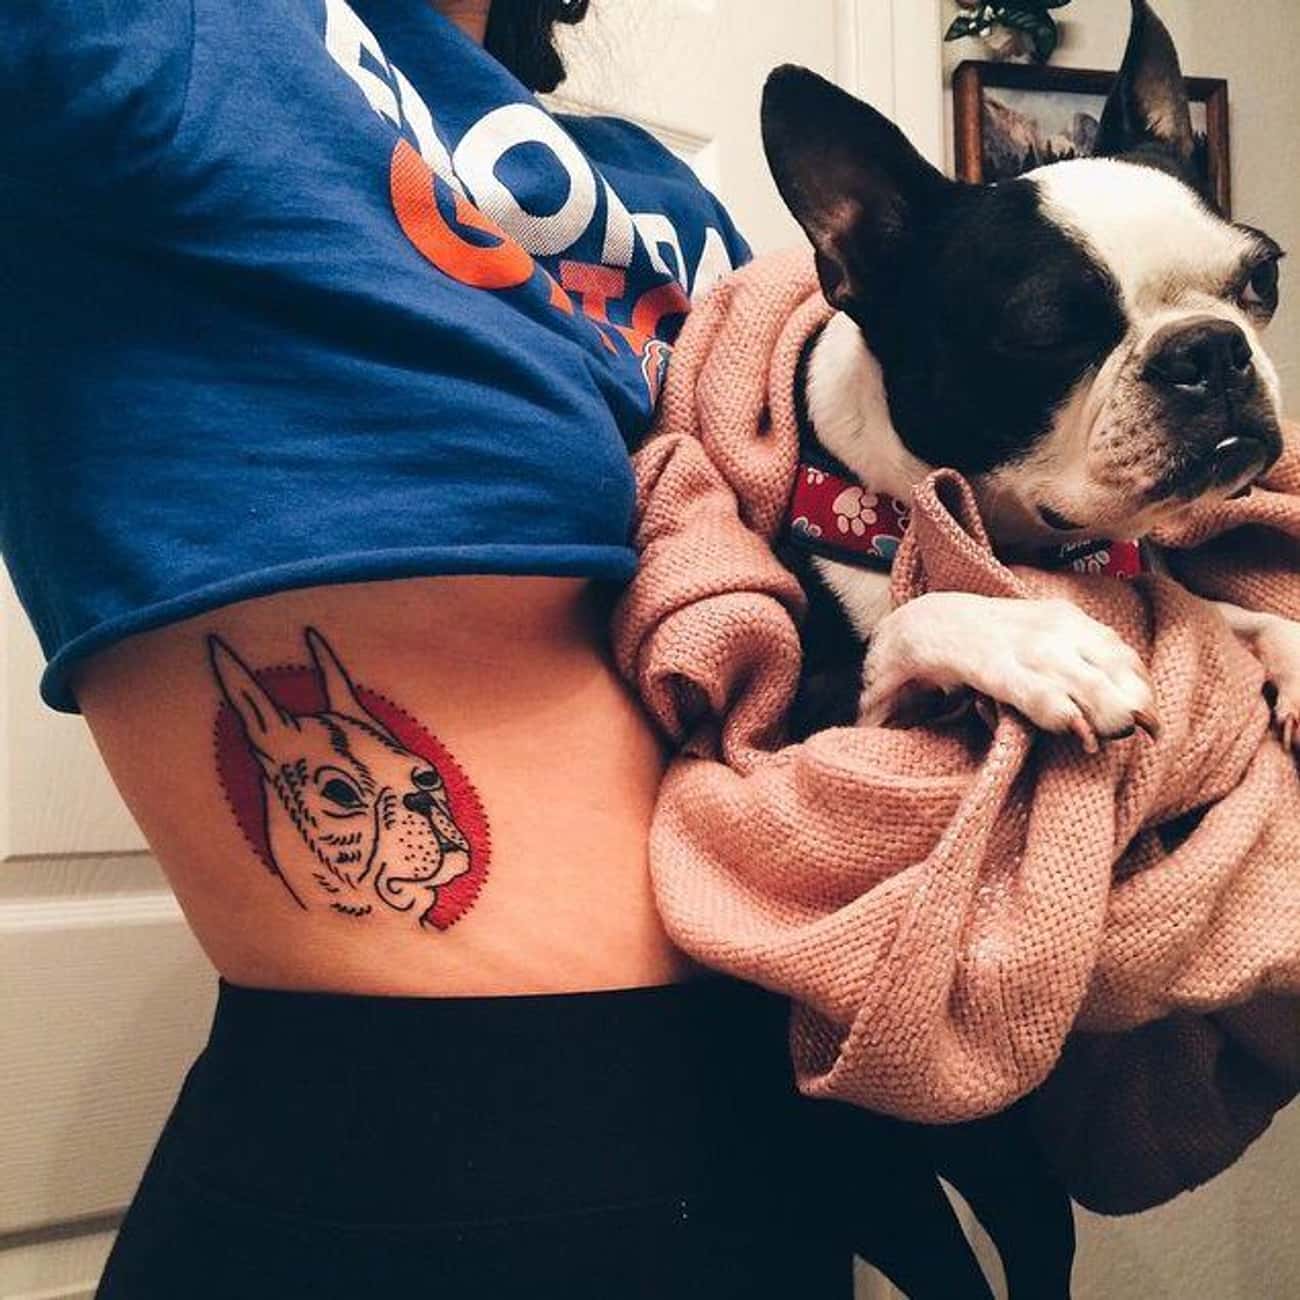 Neither This Boston Nor the Tat He Inspired Are Interested in Your Shenanigans